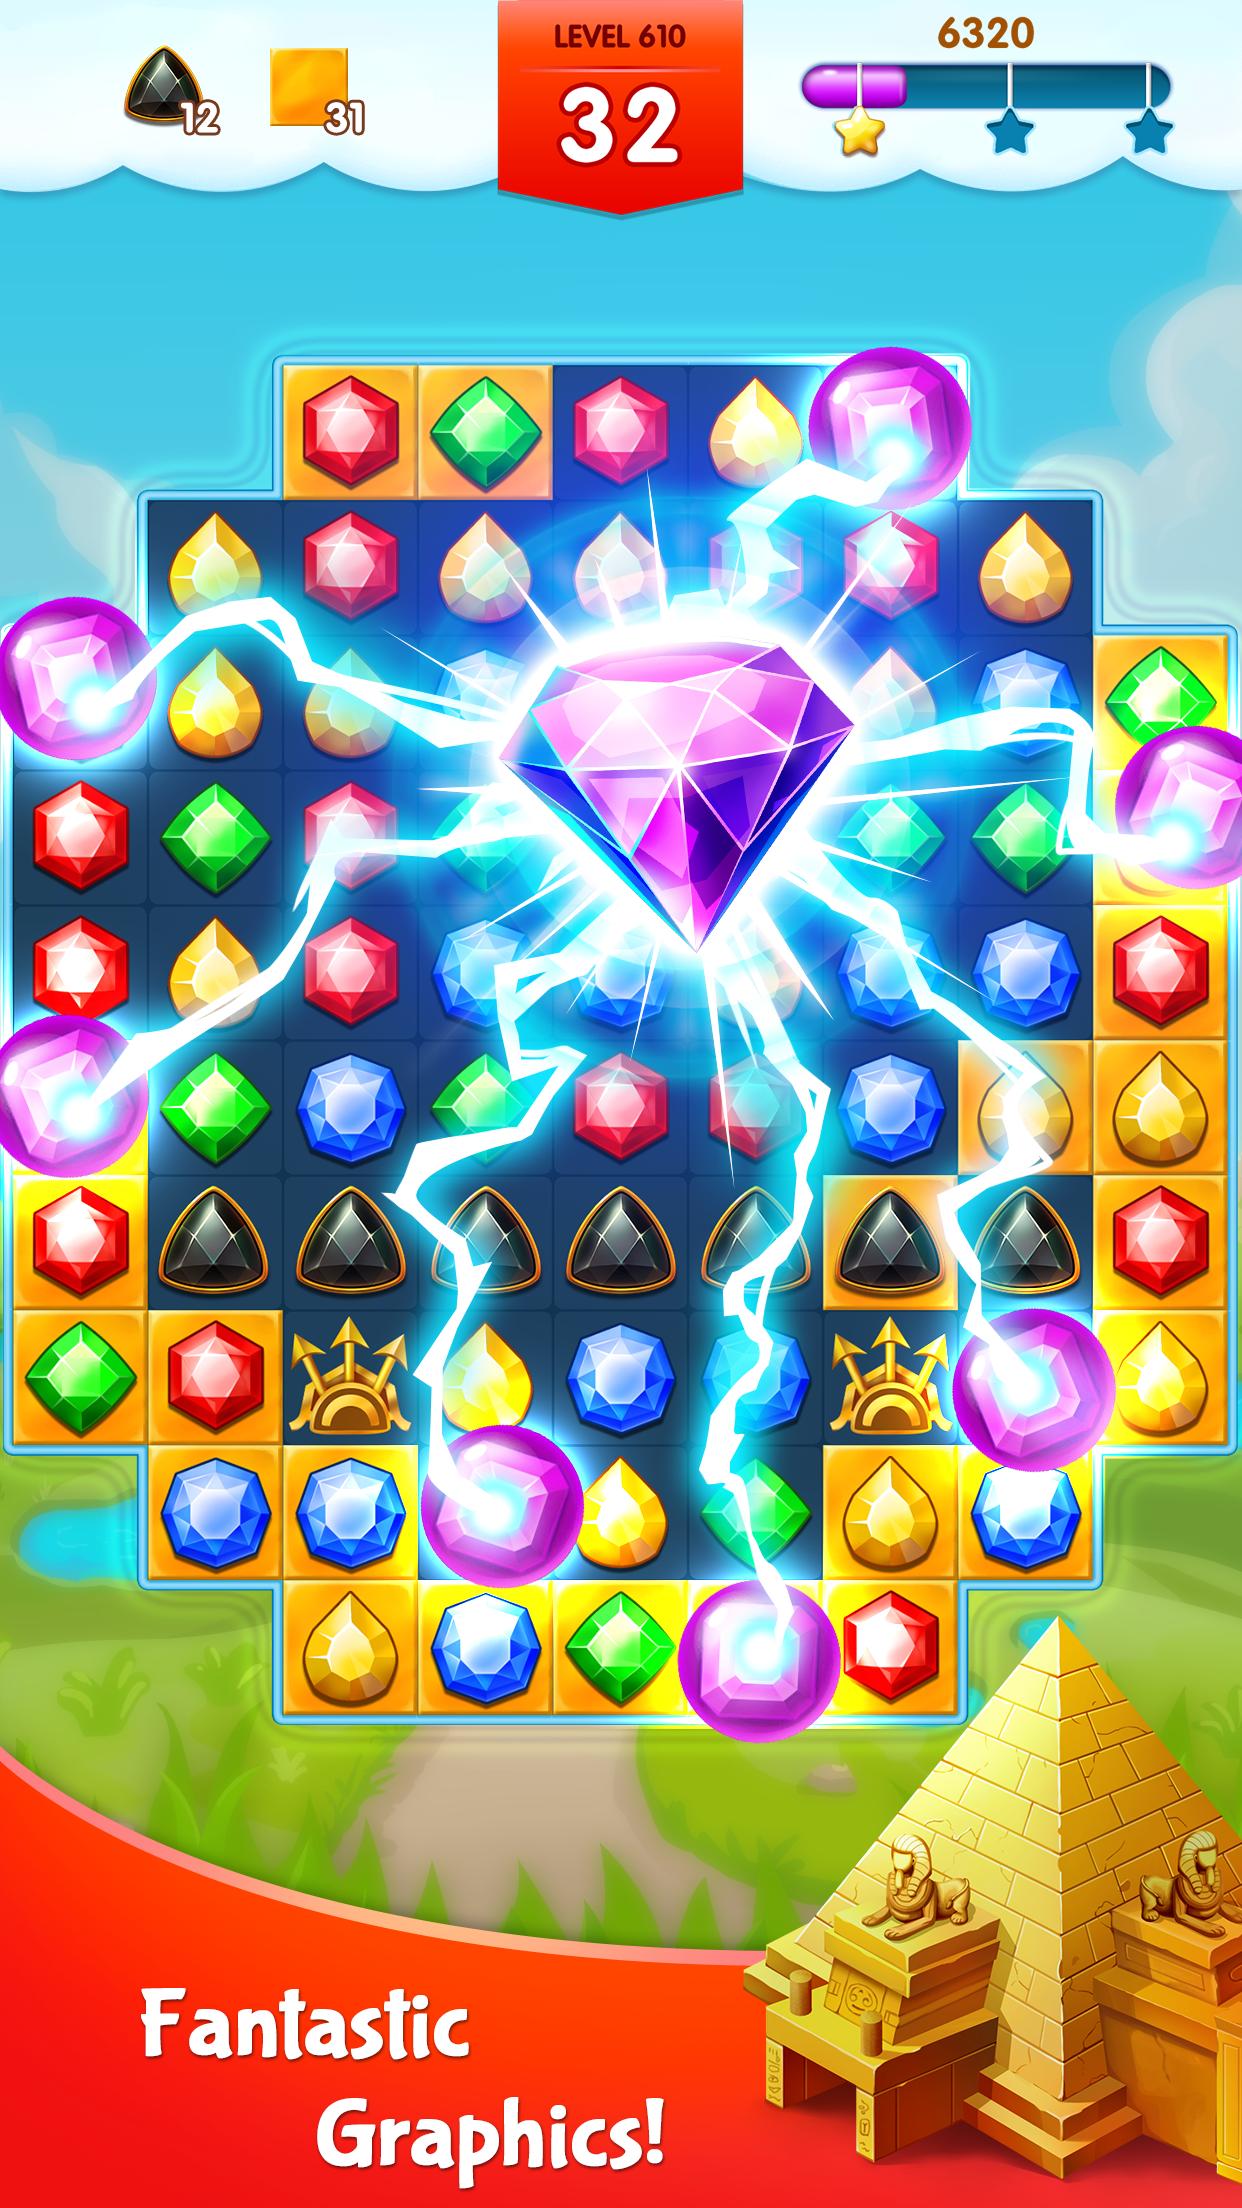 Jewels Legend - Match 3 Puzzle for Android - APK Download